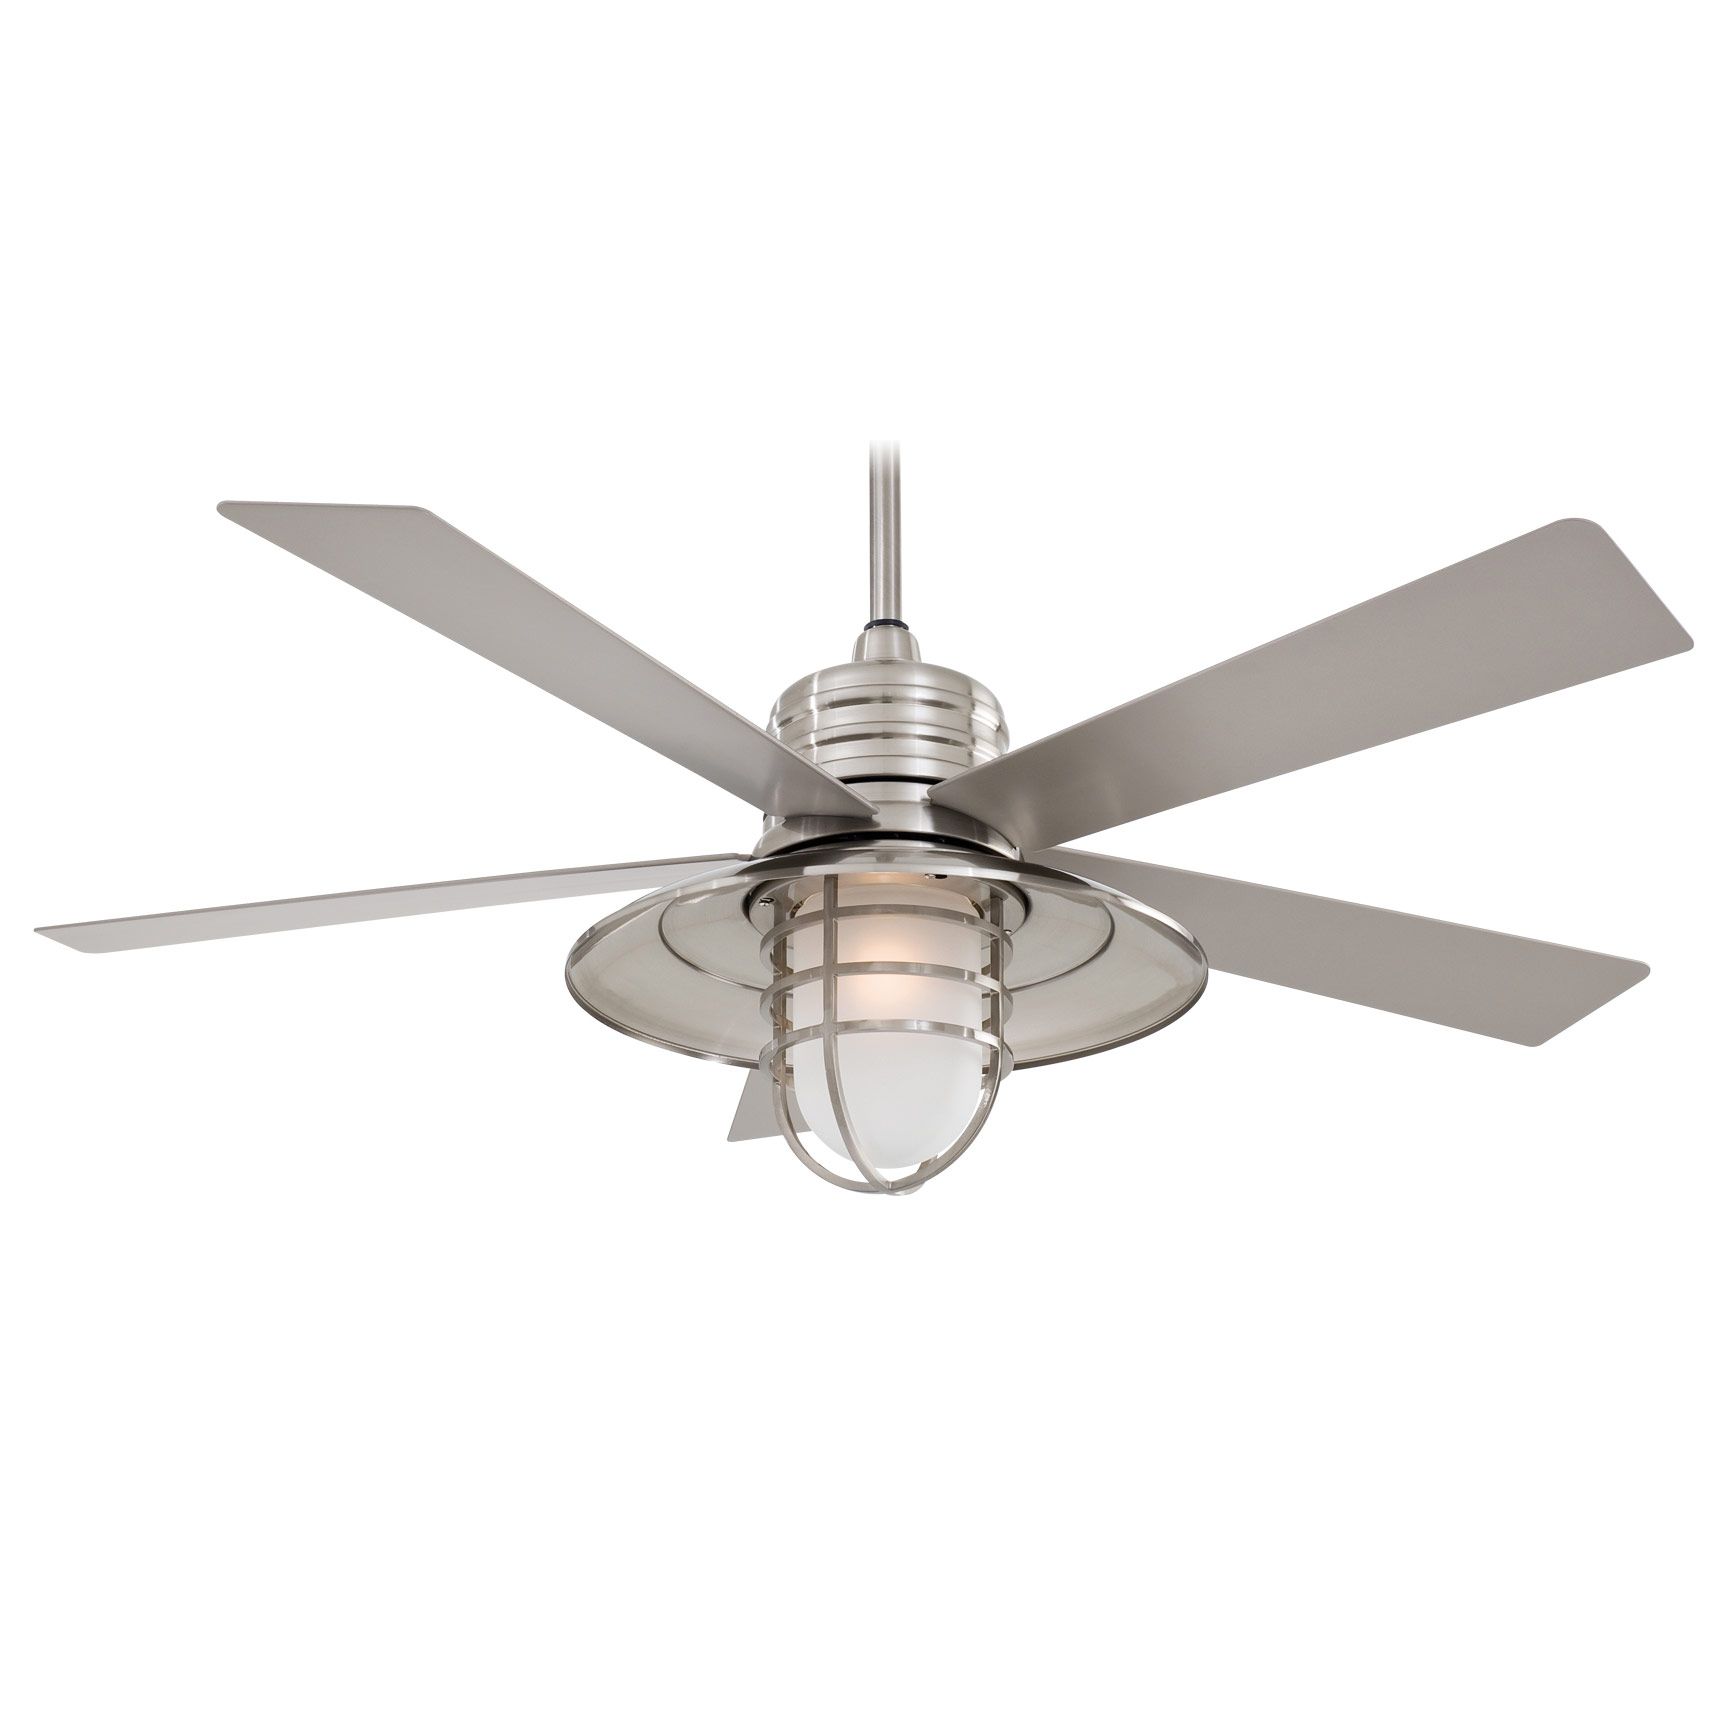 Rainman Indoor / Outdoor Ceiling Fan with Light by Minka ...